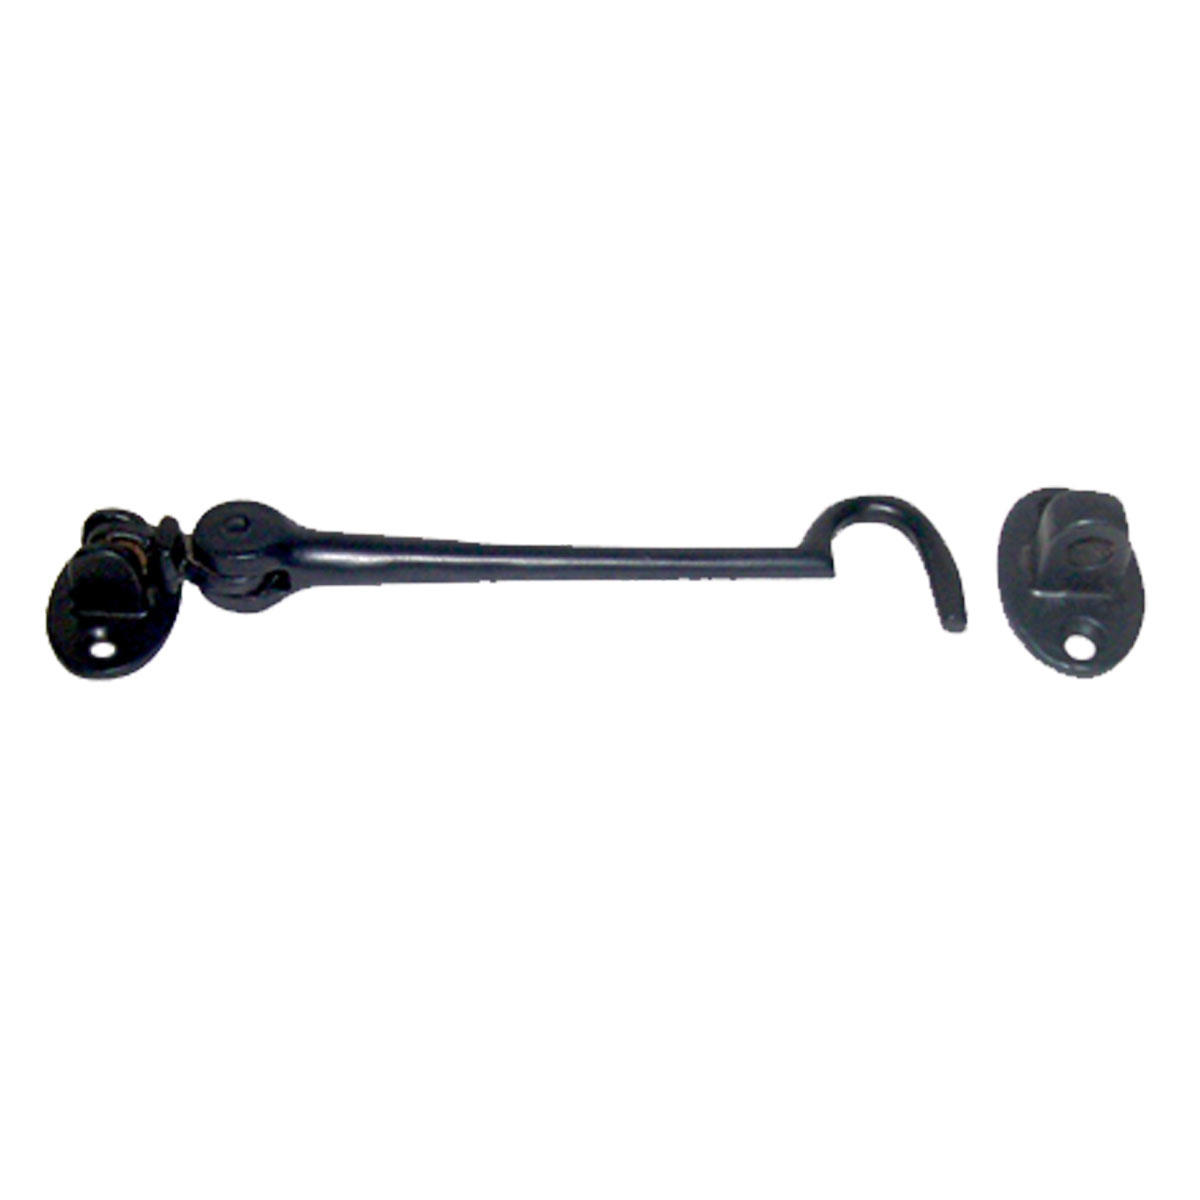 Wrought Iron Cabin Hook 6-1/2 inch